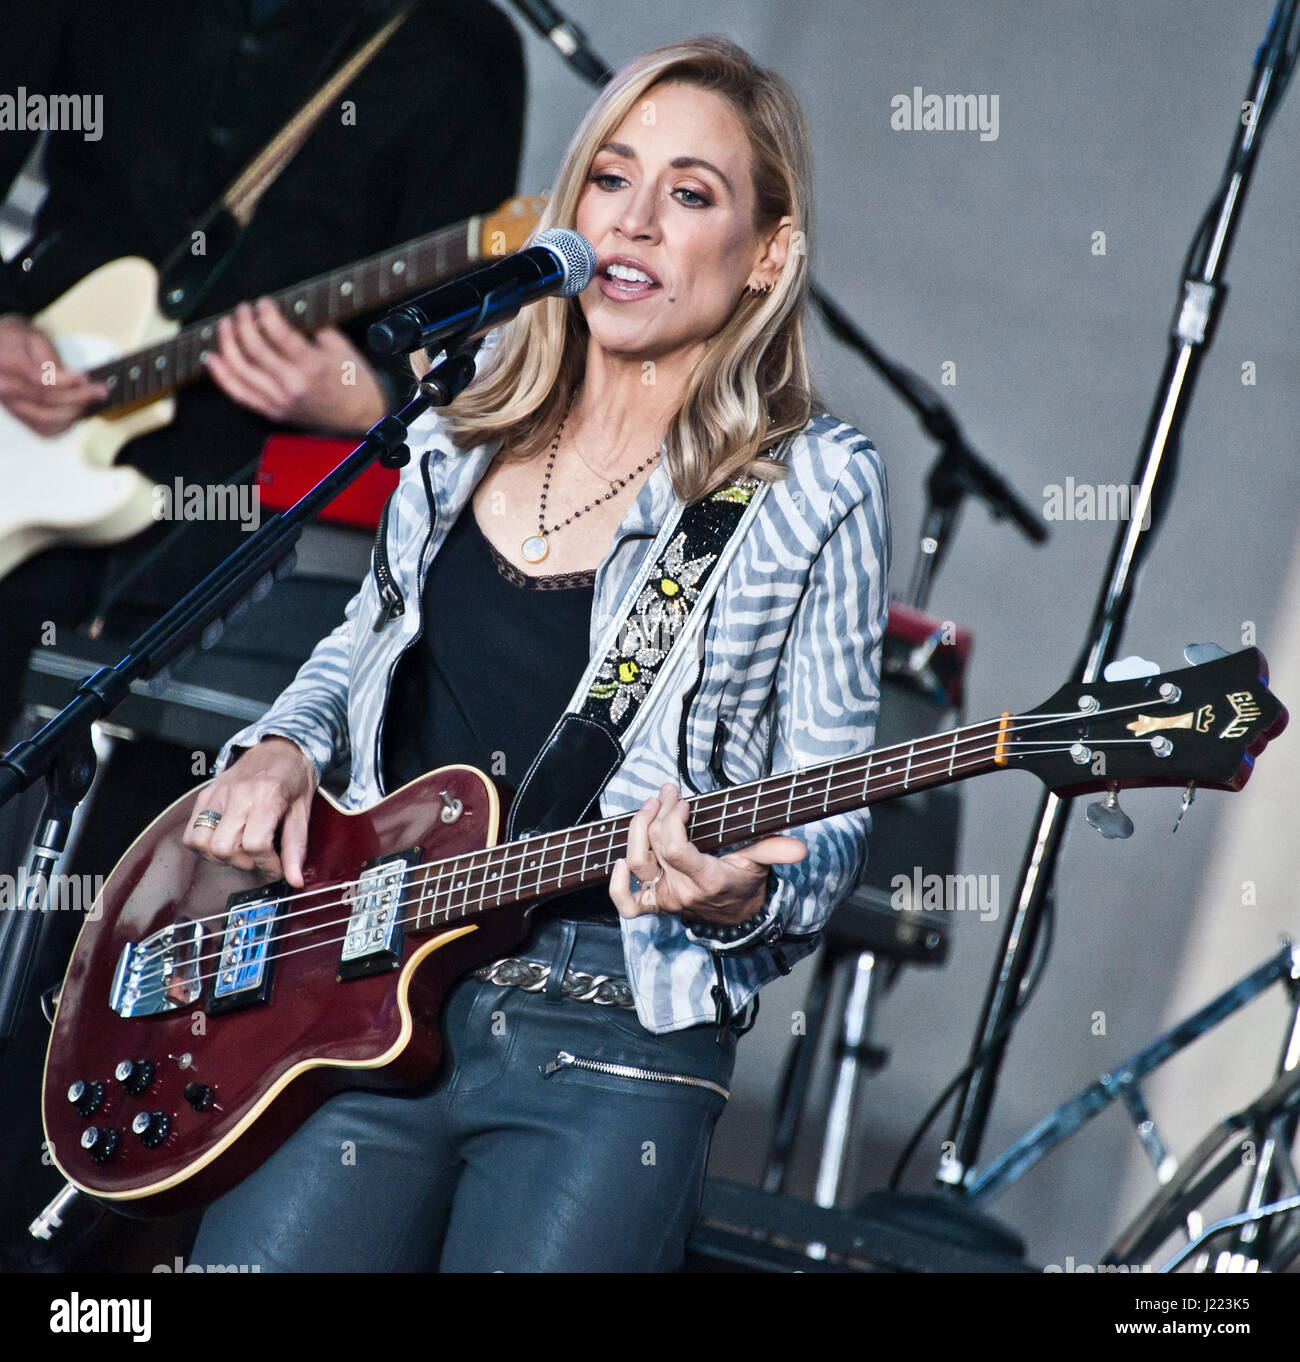 New York, NY, USA. 19th April, 2017. Sheryl Crow Performs on NBC's 'Today' Show at Rockefeller Plaza. Stock Photo